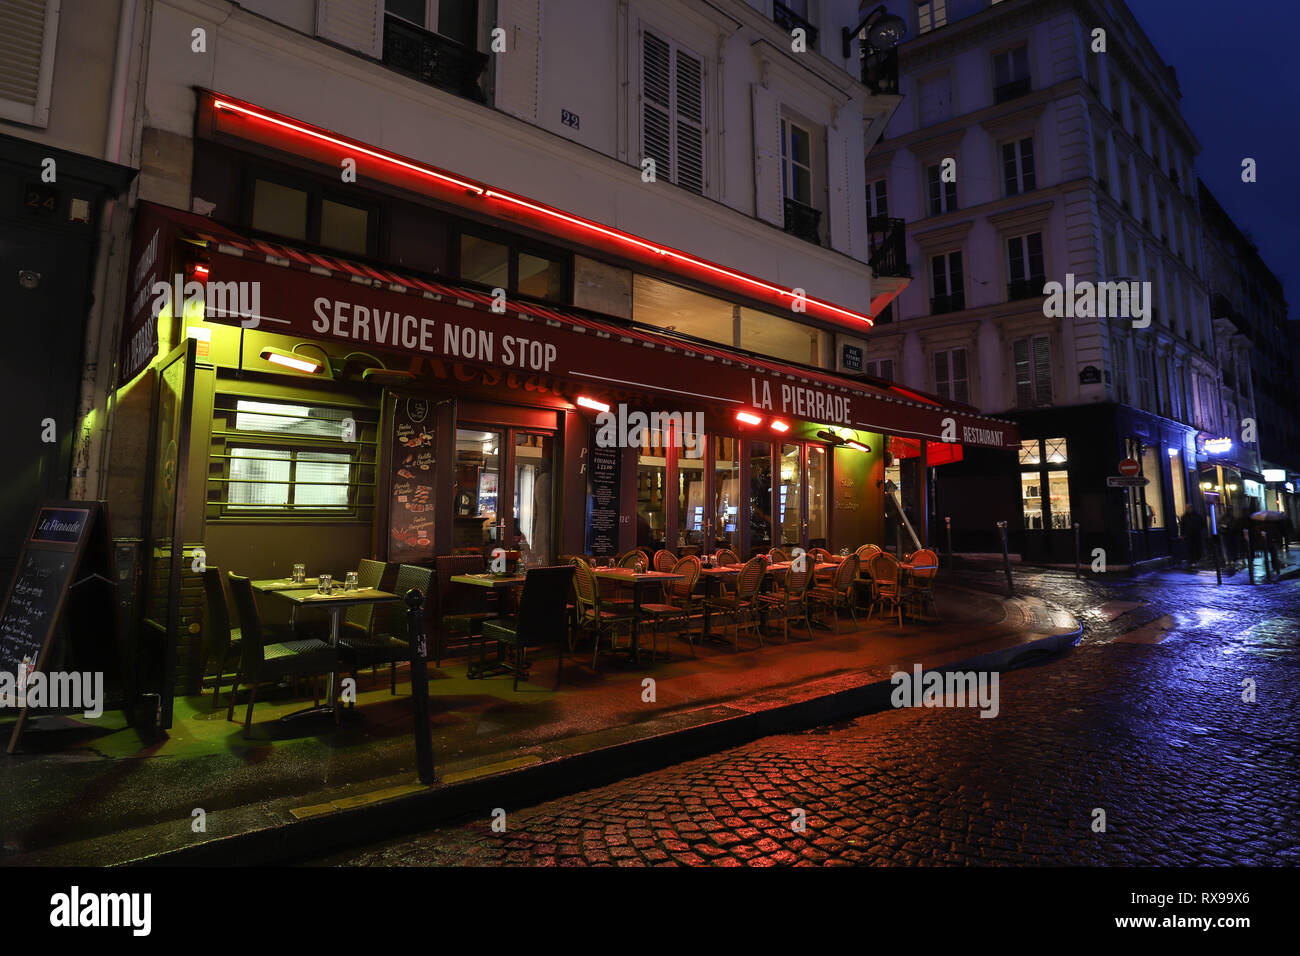 The Cafe La Pierrade is a cafe in the Montmartre at rainy night , Paris ...